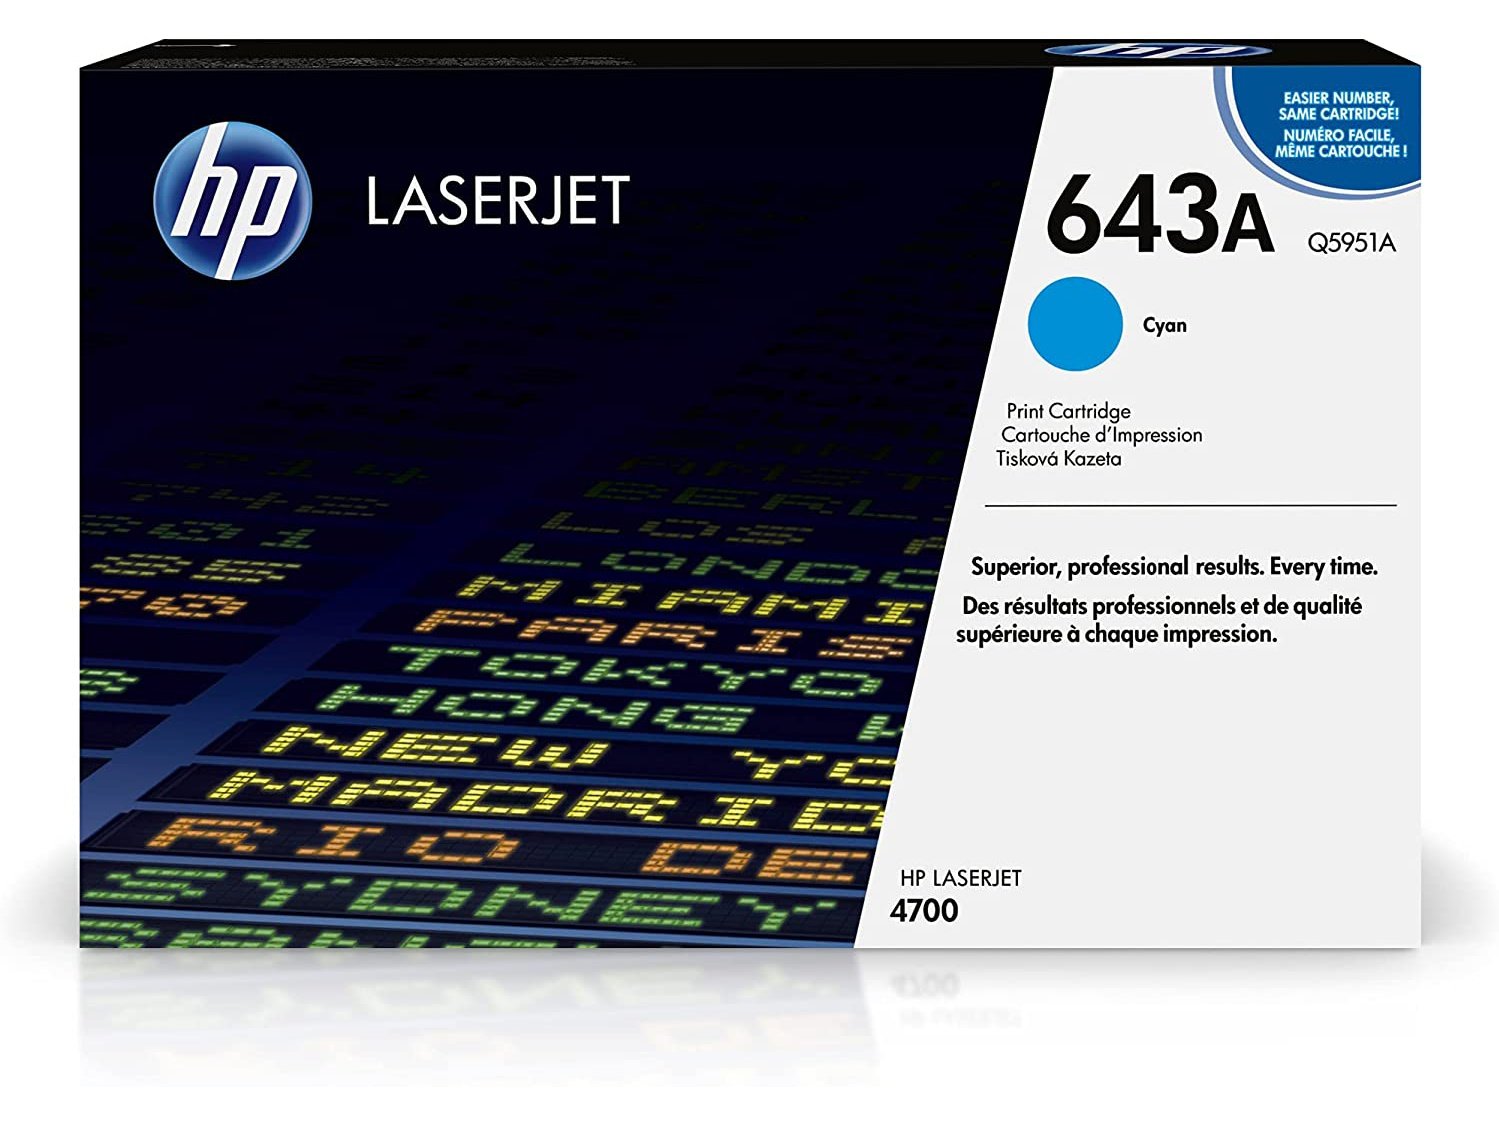 ICU Compatible/ OEM Get HP ICUQ5951A Yields 10,000 Pages 643A Cyan Laser Toner Cartridge - Ink Cartridges USA